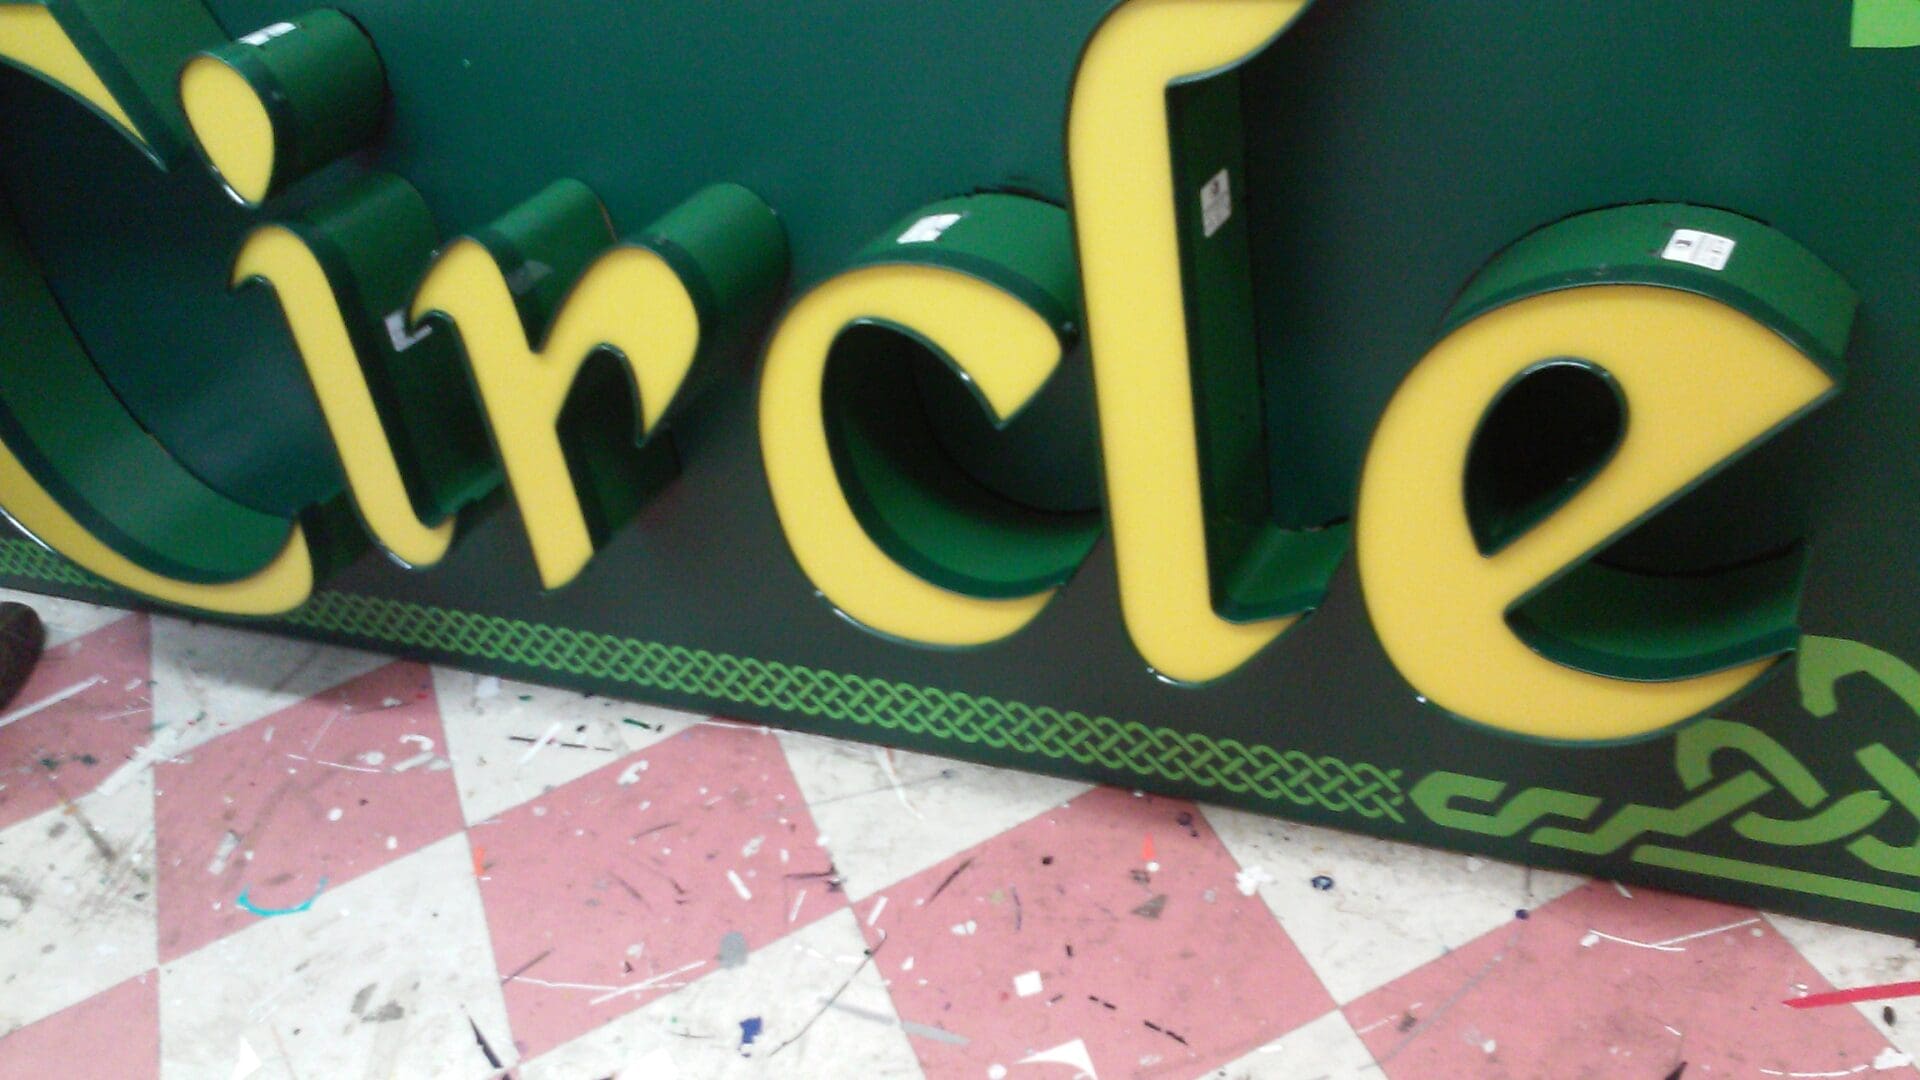 A close up of the letters on the floor